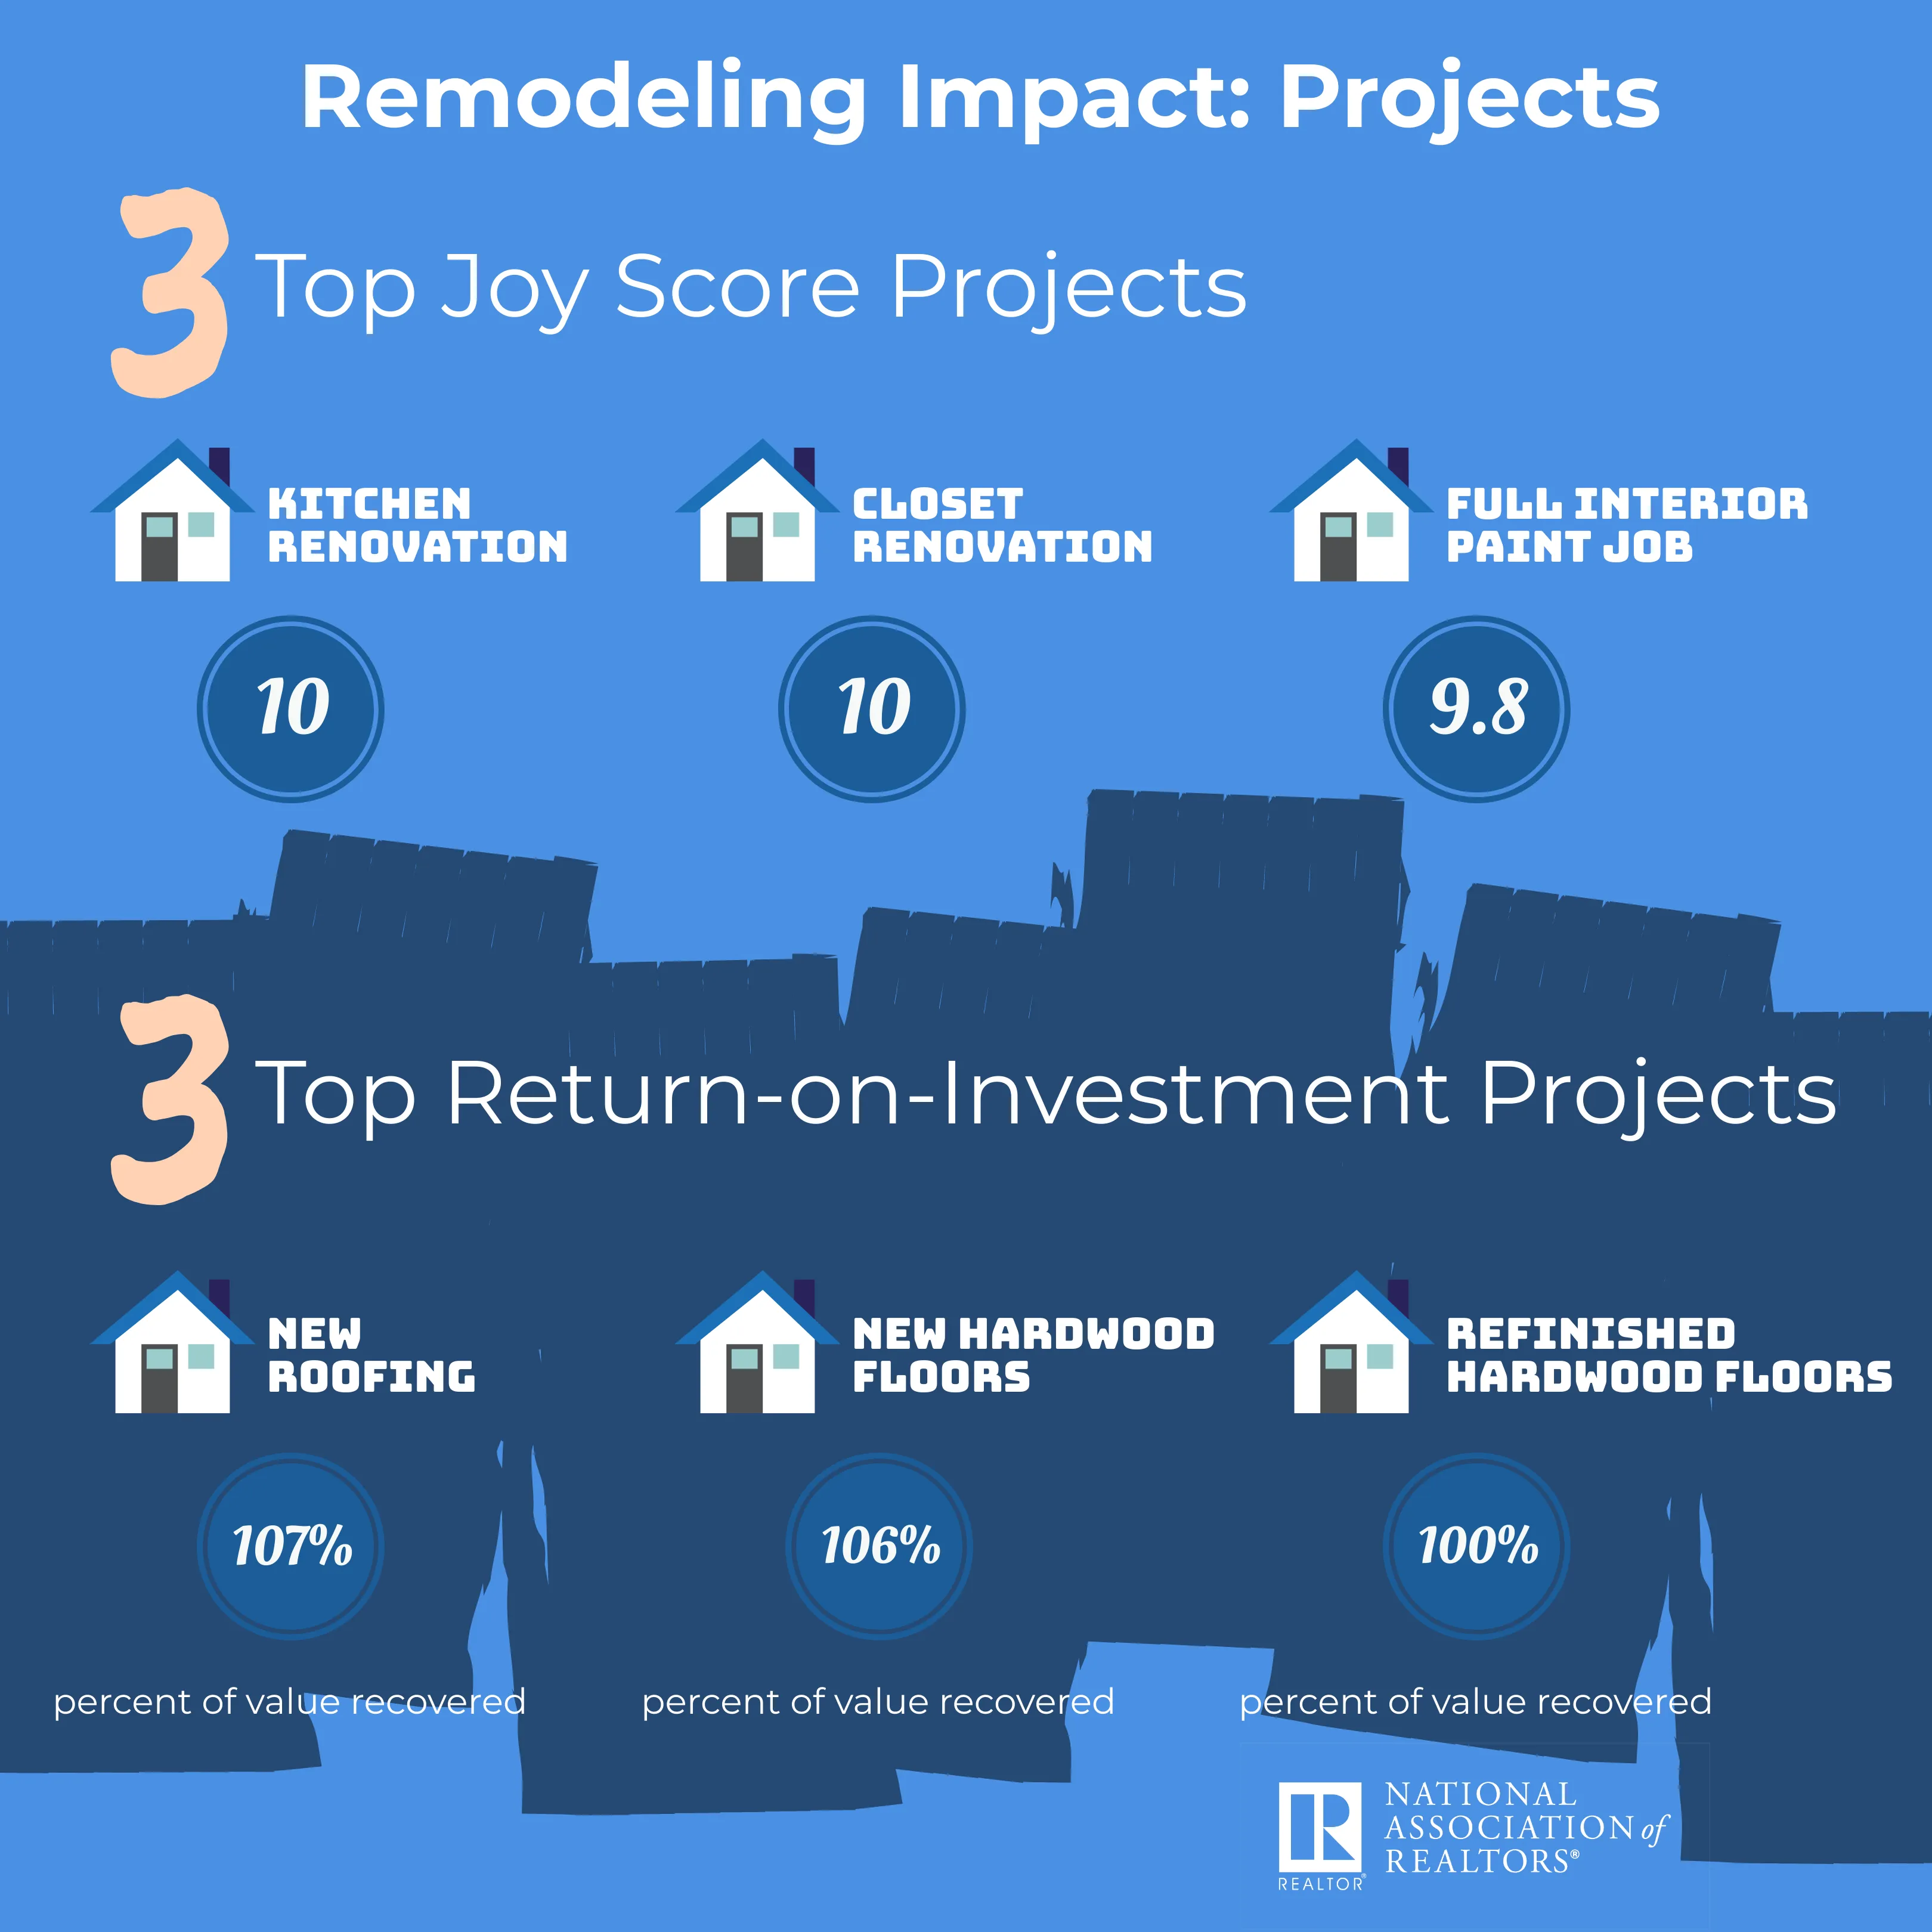 Remodeling Impact Projects. 3 Top Joy Score Projects: Kitchen, Closet, Full Interior Paint Job. 3 Top Return on Investment Projects: New Roof, New Hardwood Floors, Refinished Hardwood Floors